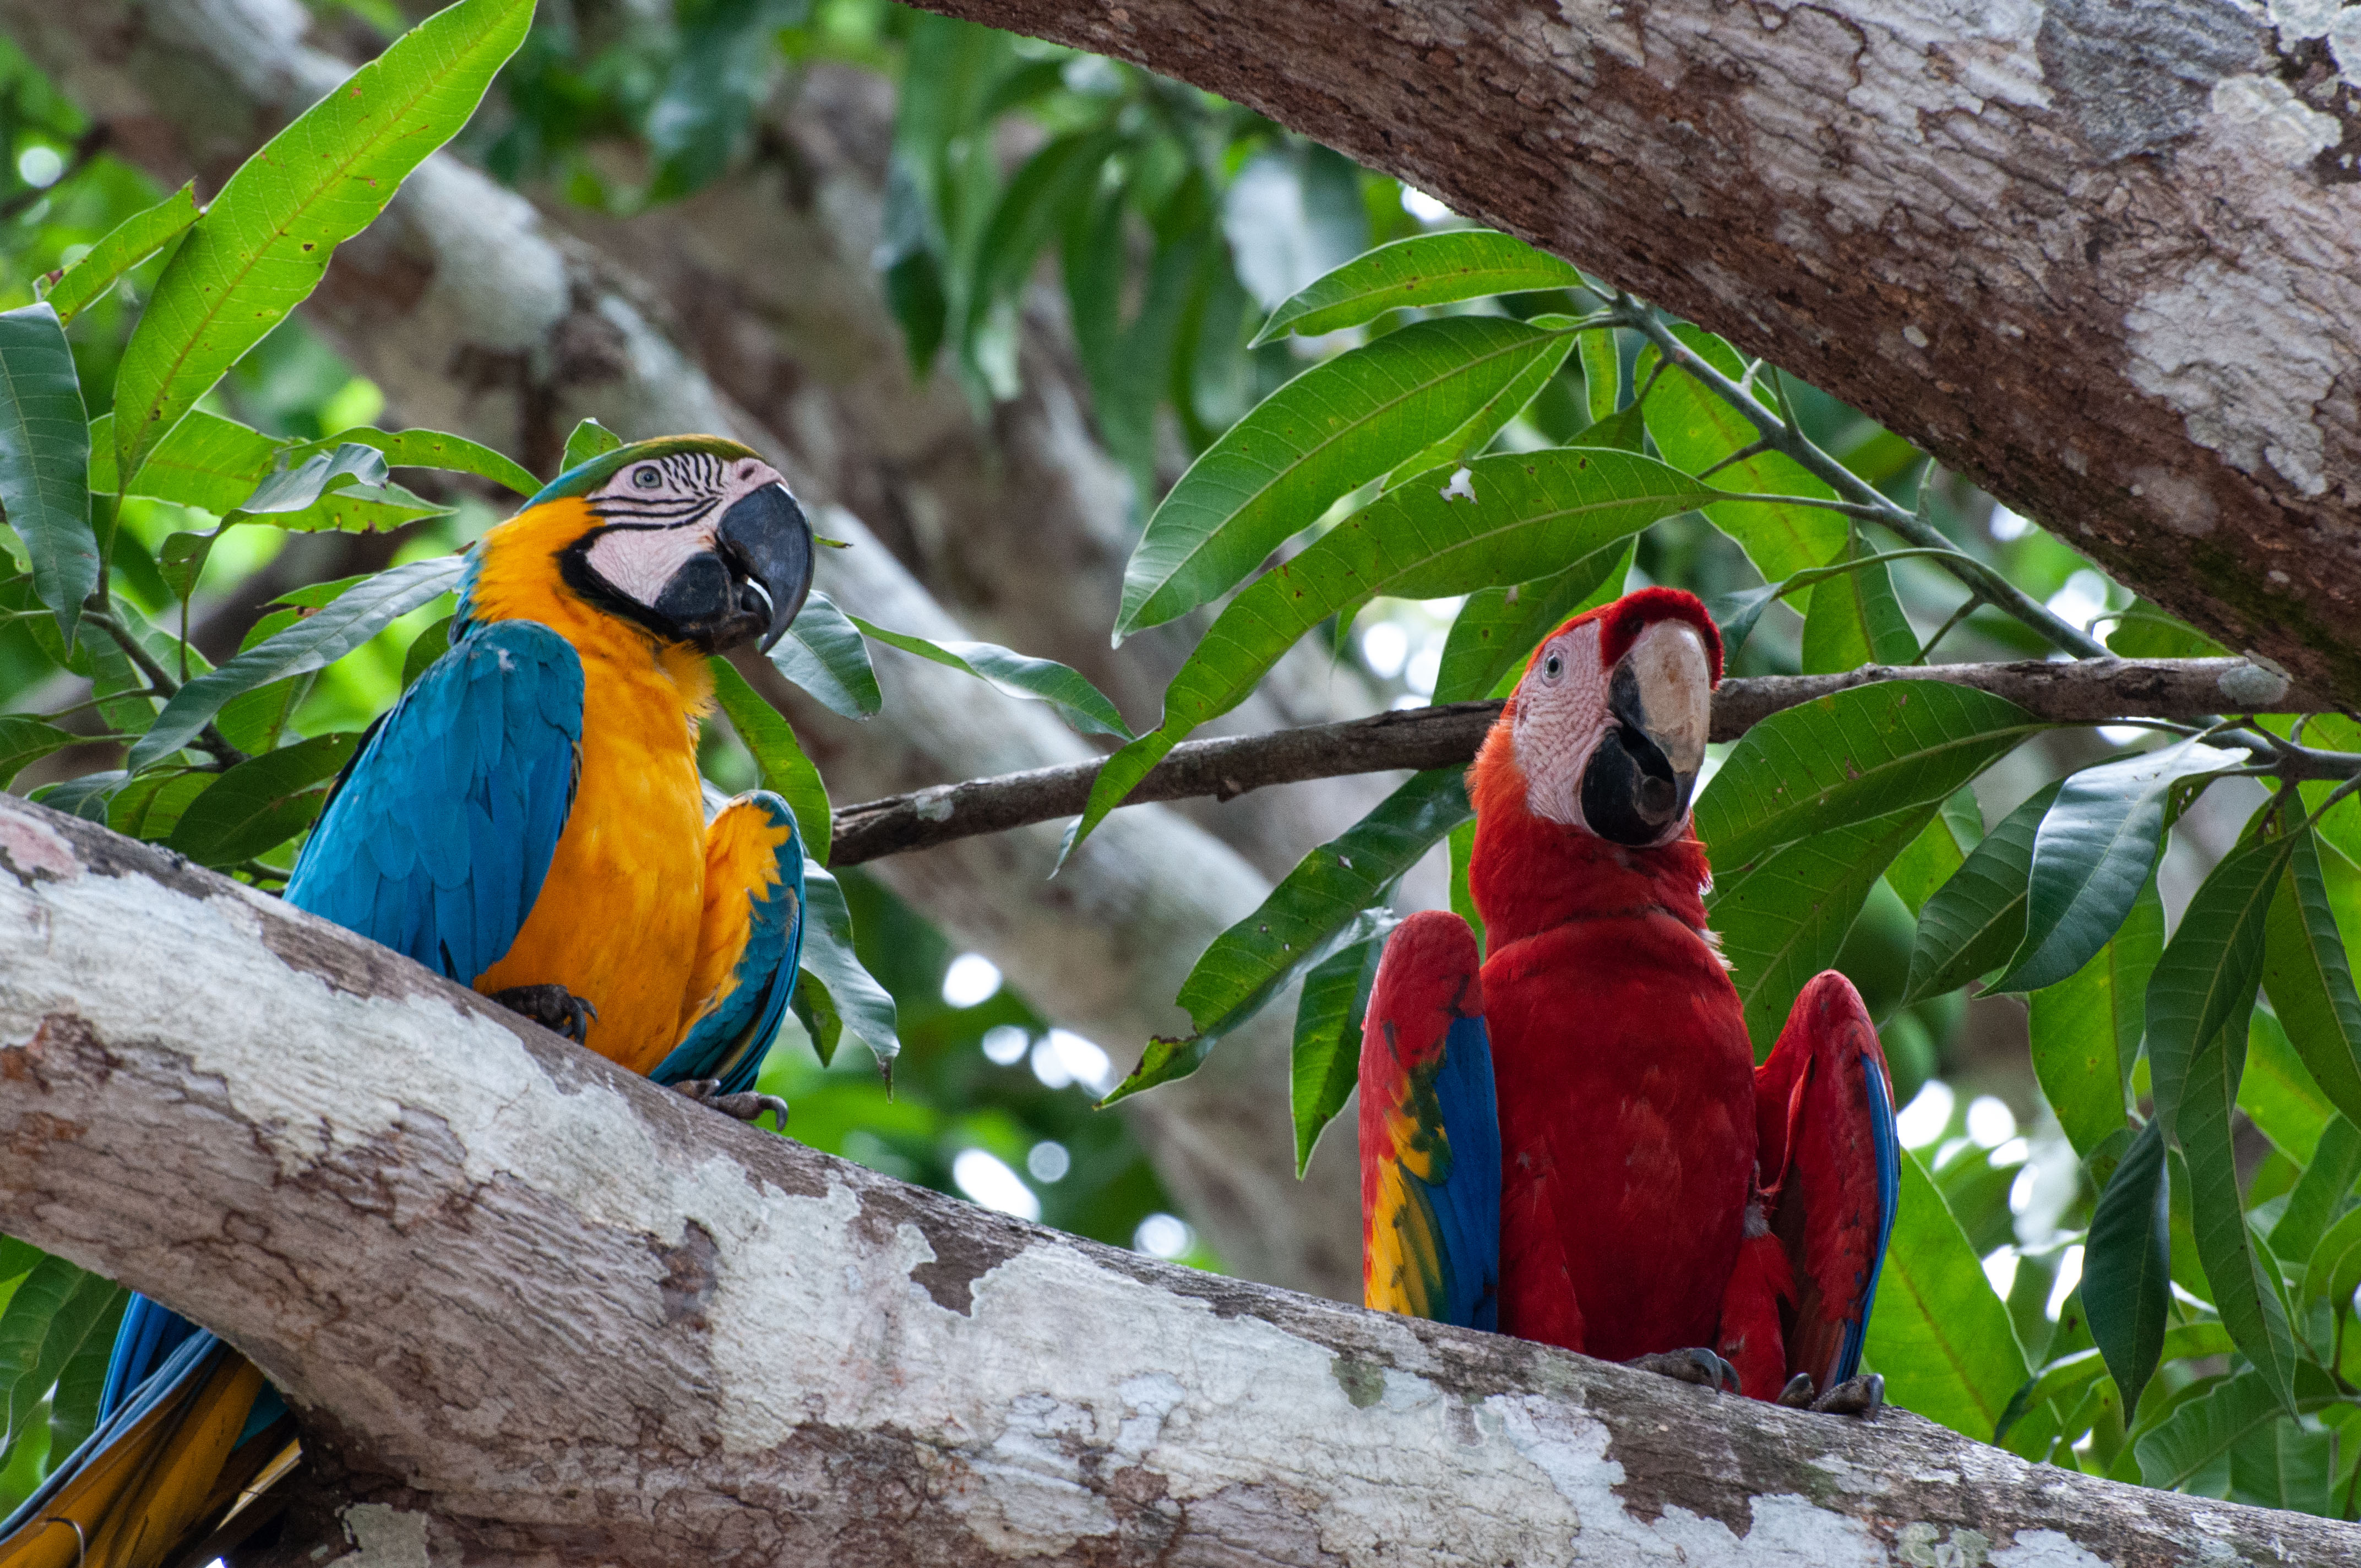 Blue-and-yellow macaw, scarlet macaw